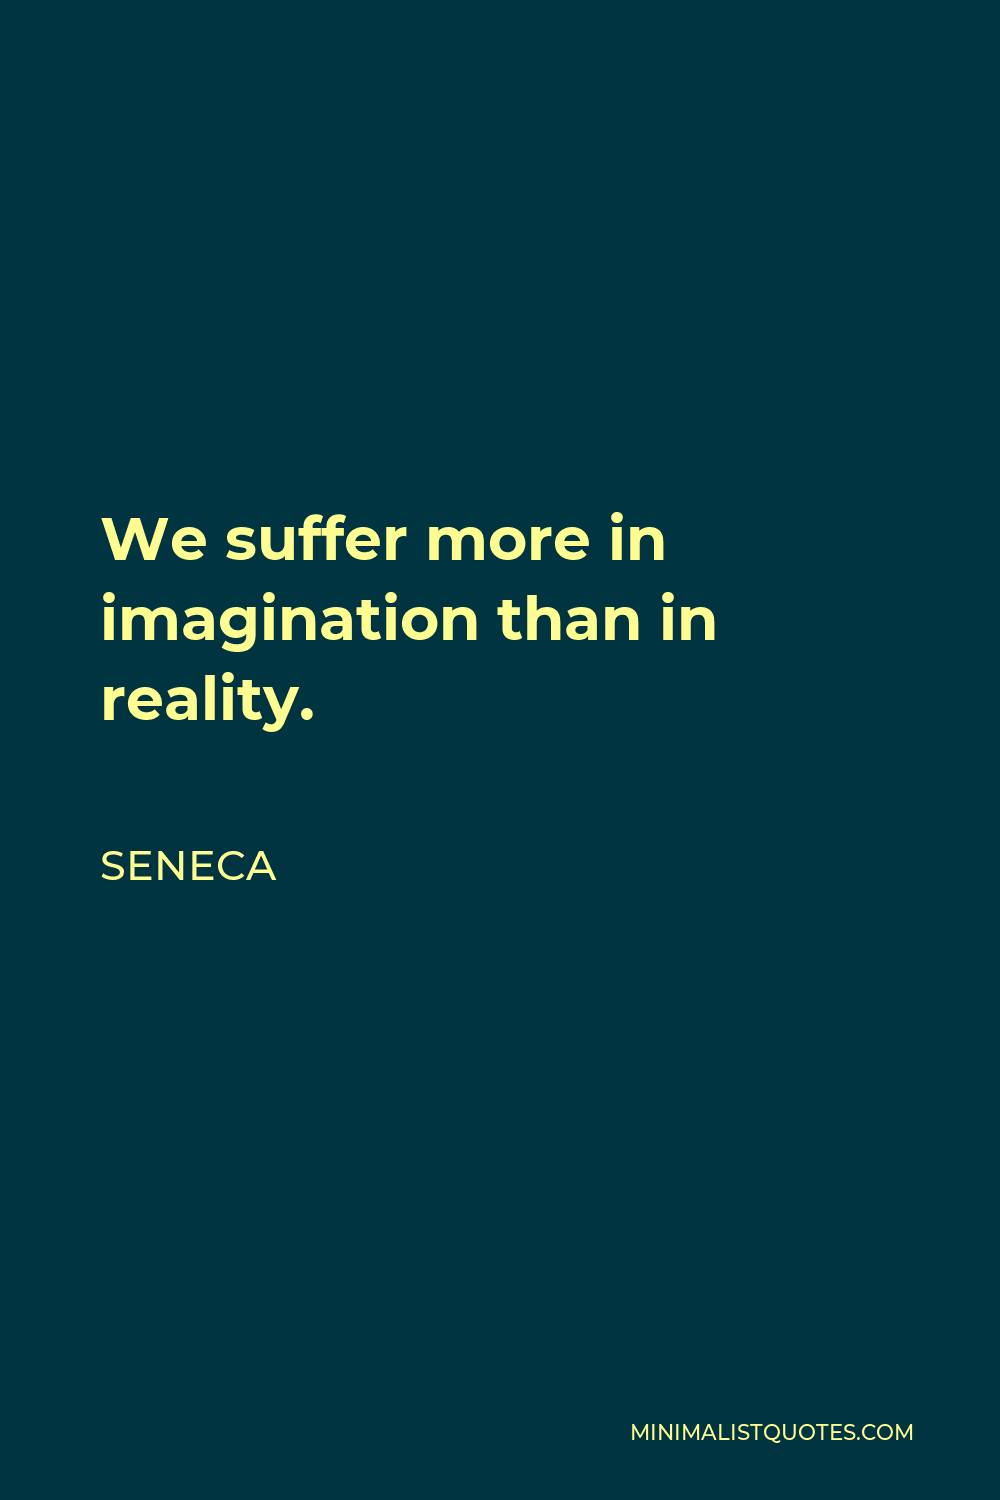 Seneca Quote - We suffer more in imagination than in reality.